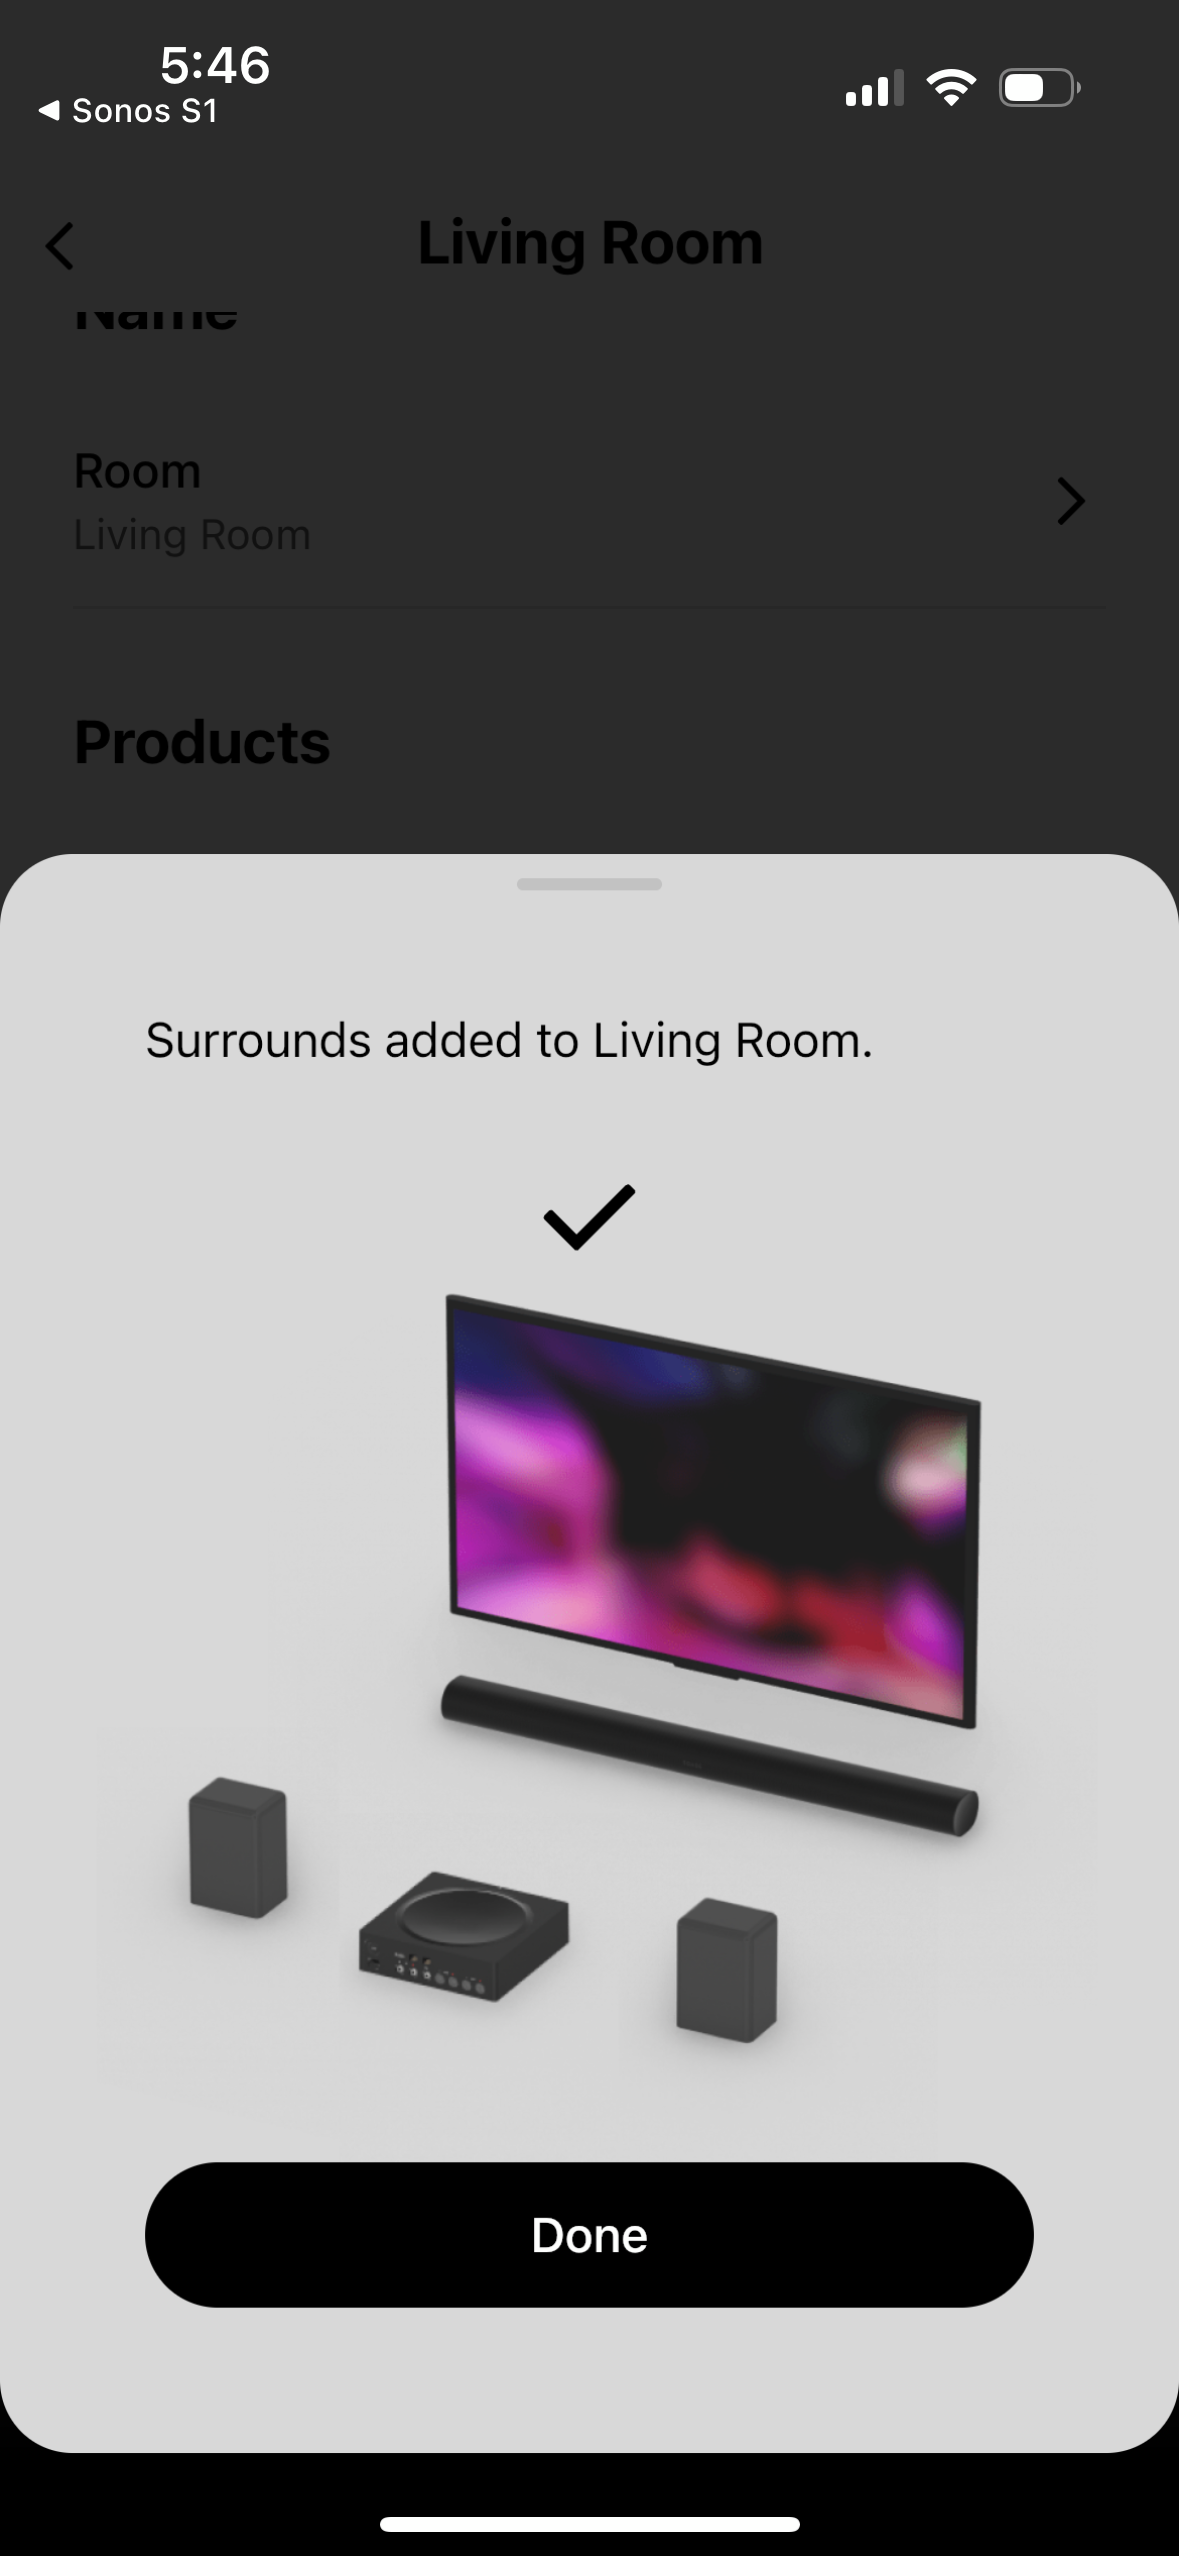 ARC & Amp surround sound connected, but not working Sonos